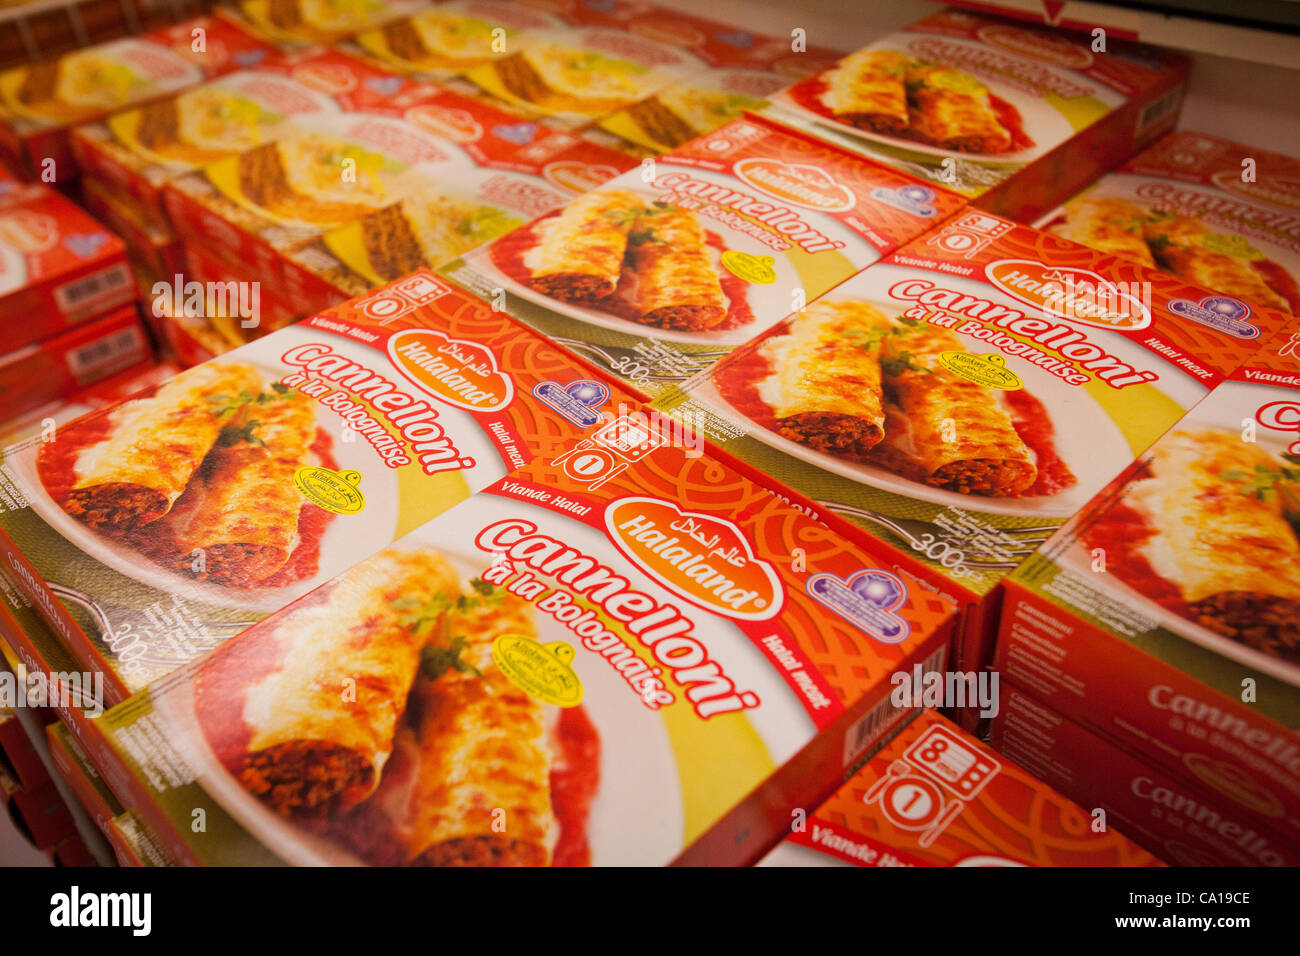 Packages of Halal cannelloni in the freezer cabinet at a Halal supermarket in Nantes, France, 17 March 2012 Stock Photo